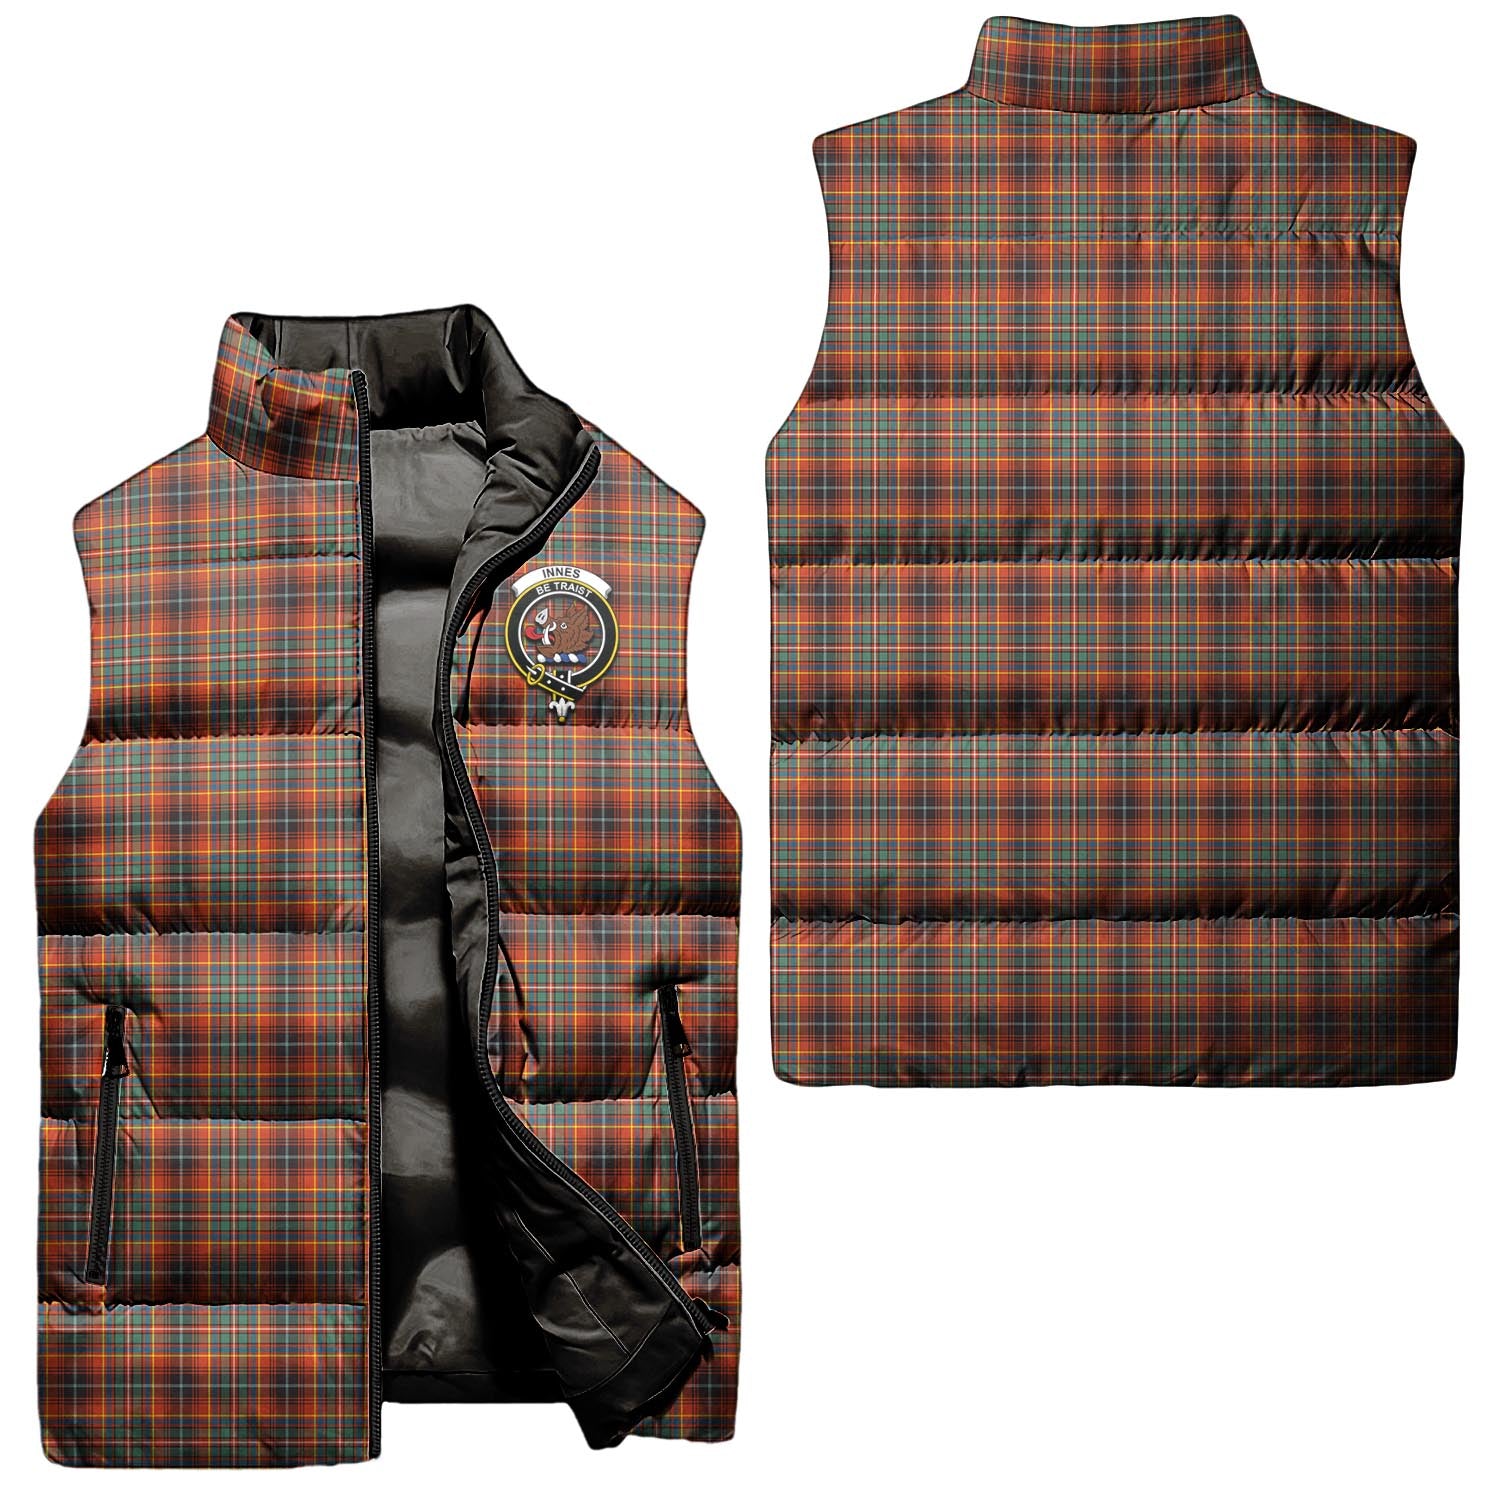 innes-ancient-clan-puffer-vest-family-crest-plaid-sleeveless-down-jacket